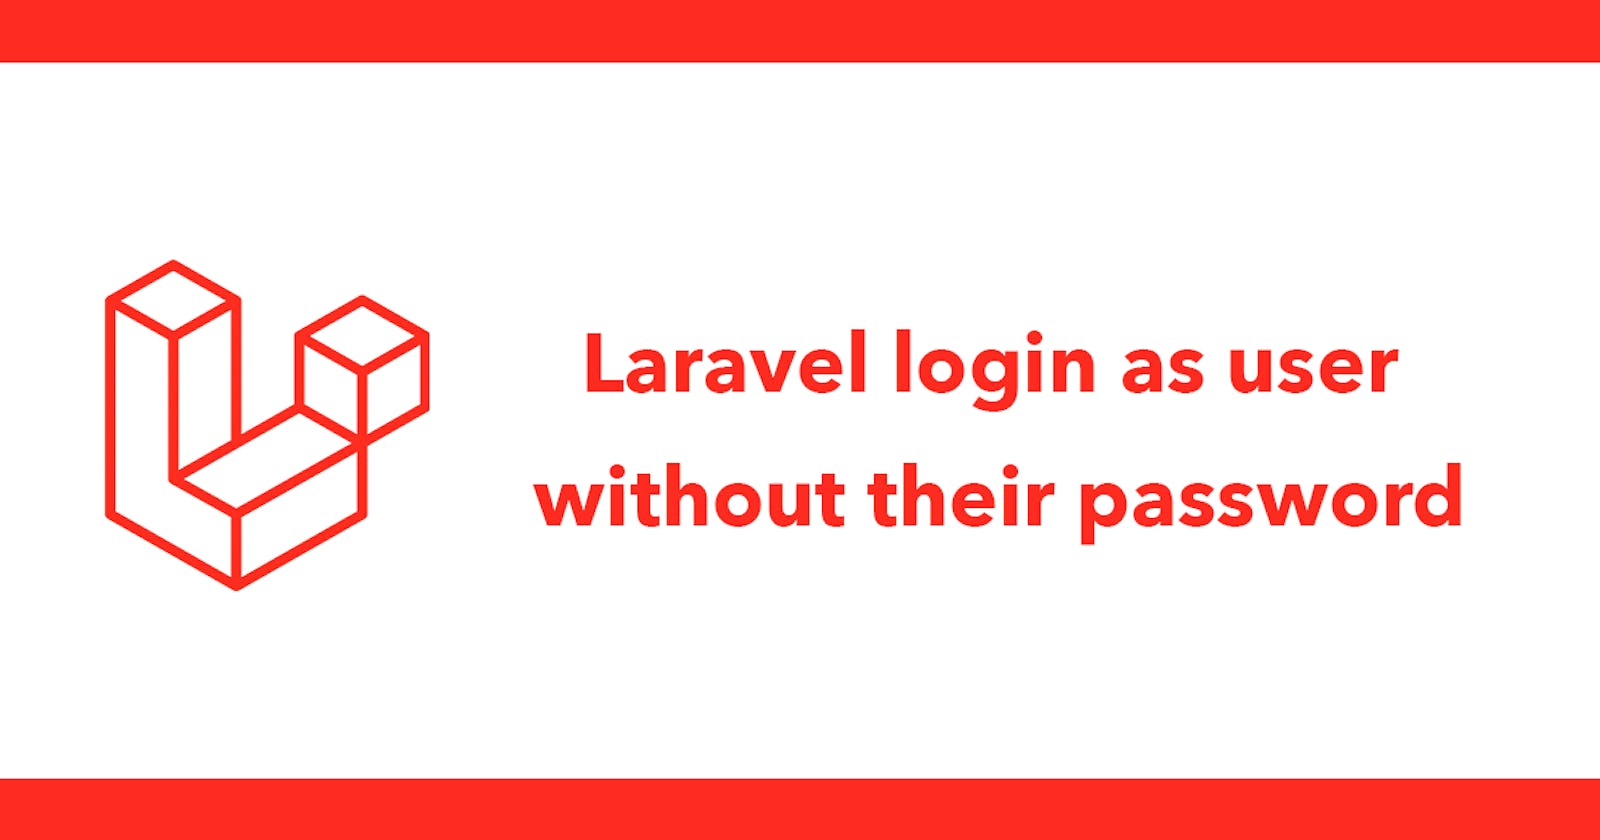 Laravel login as user without their password